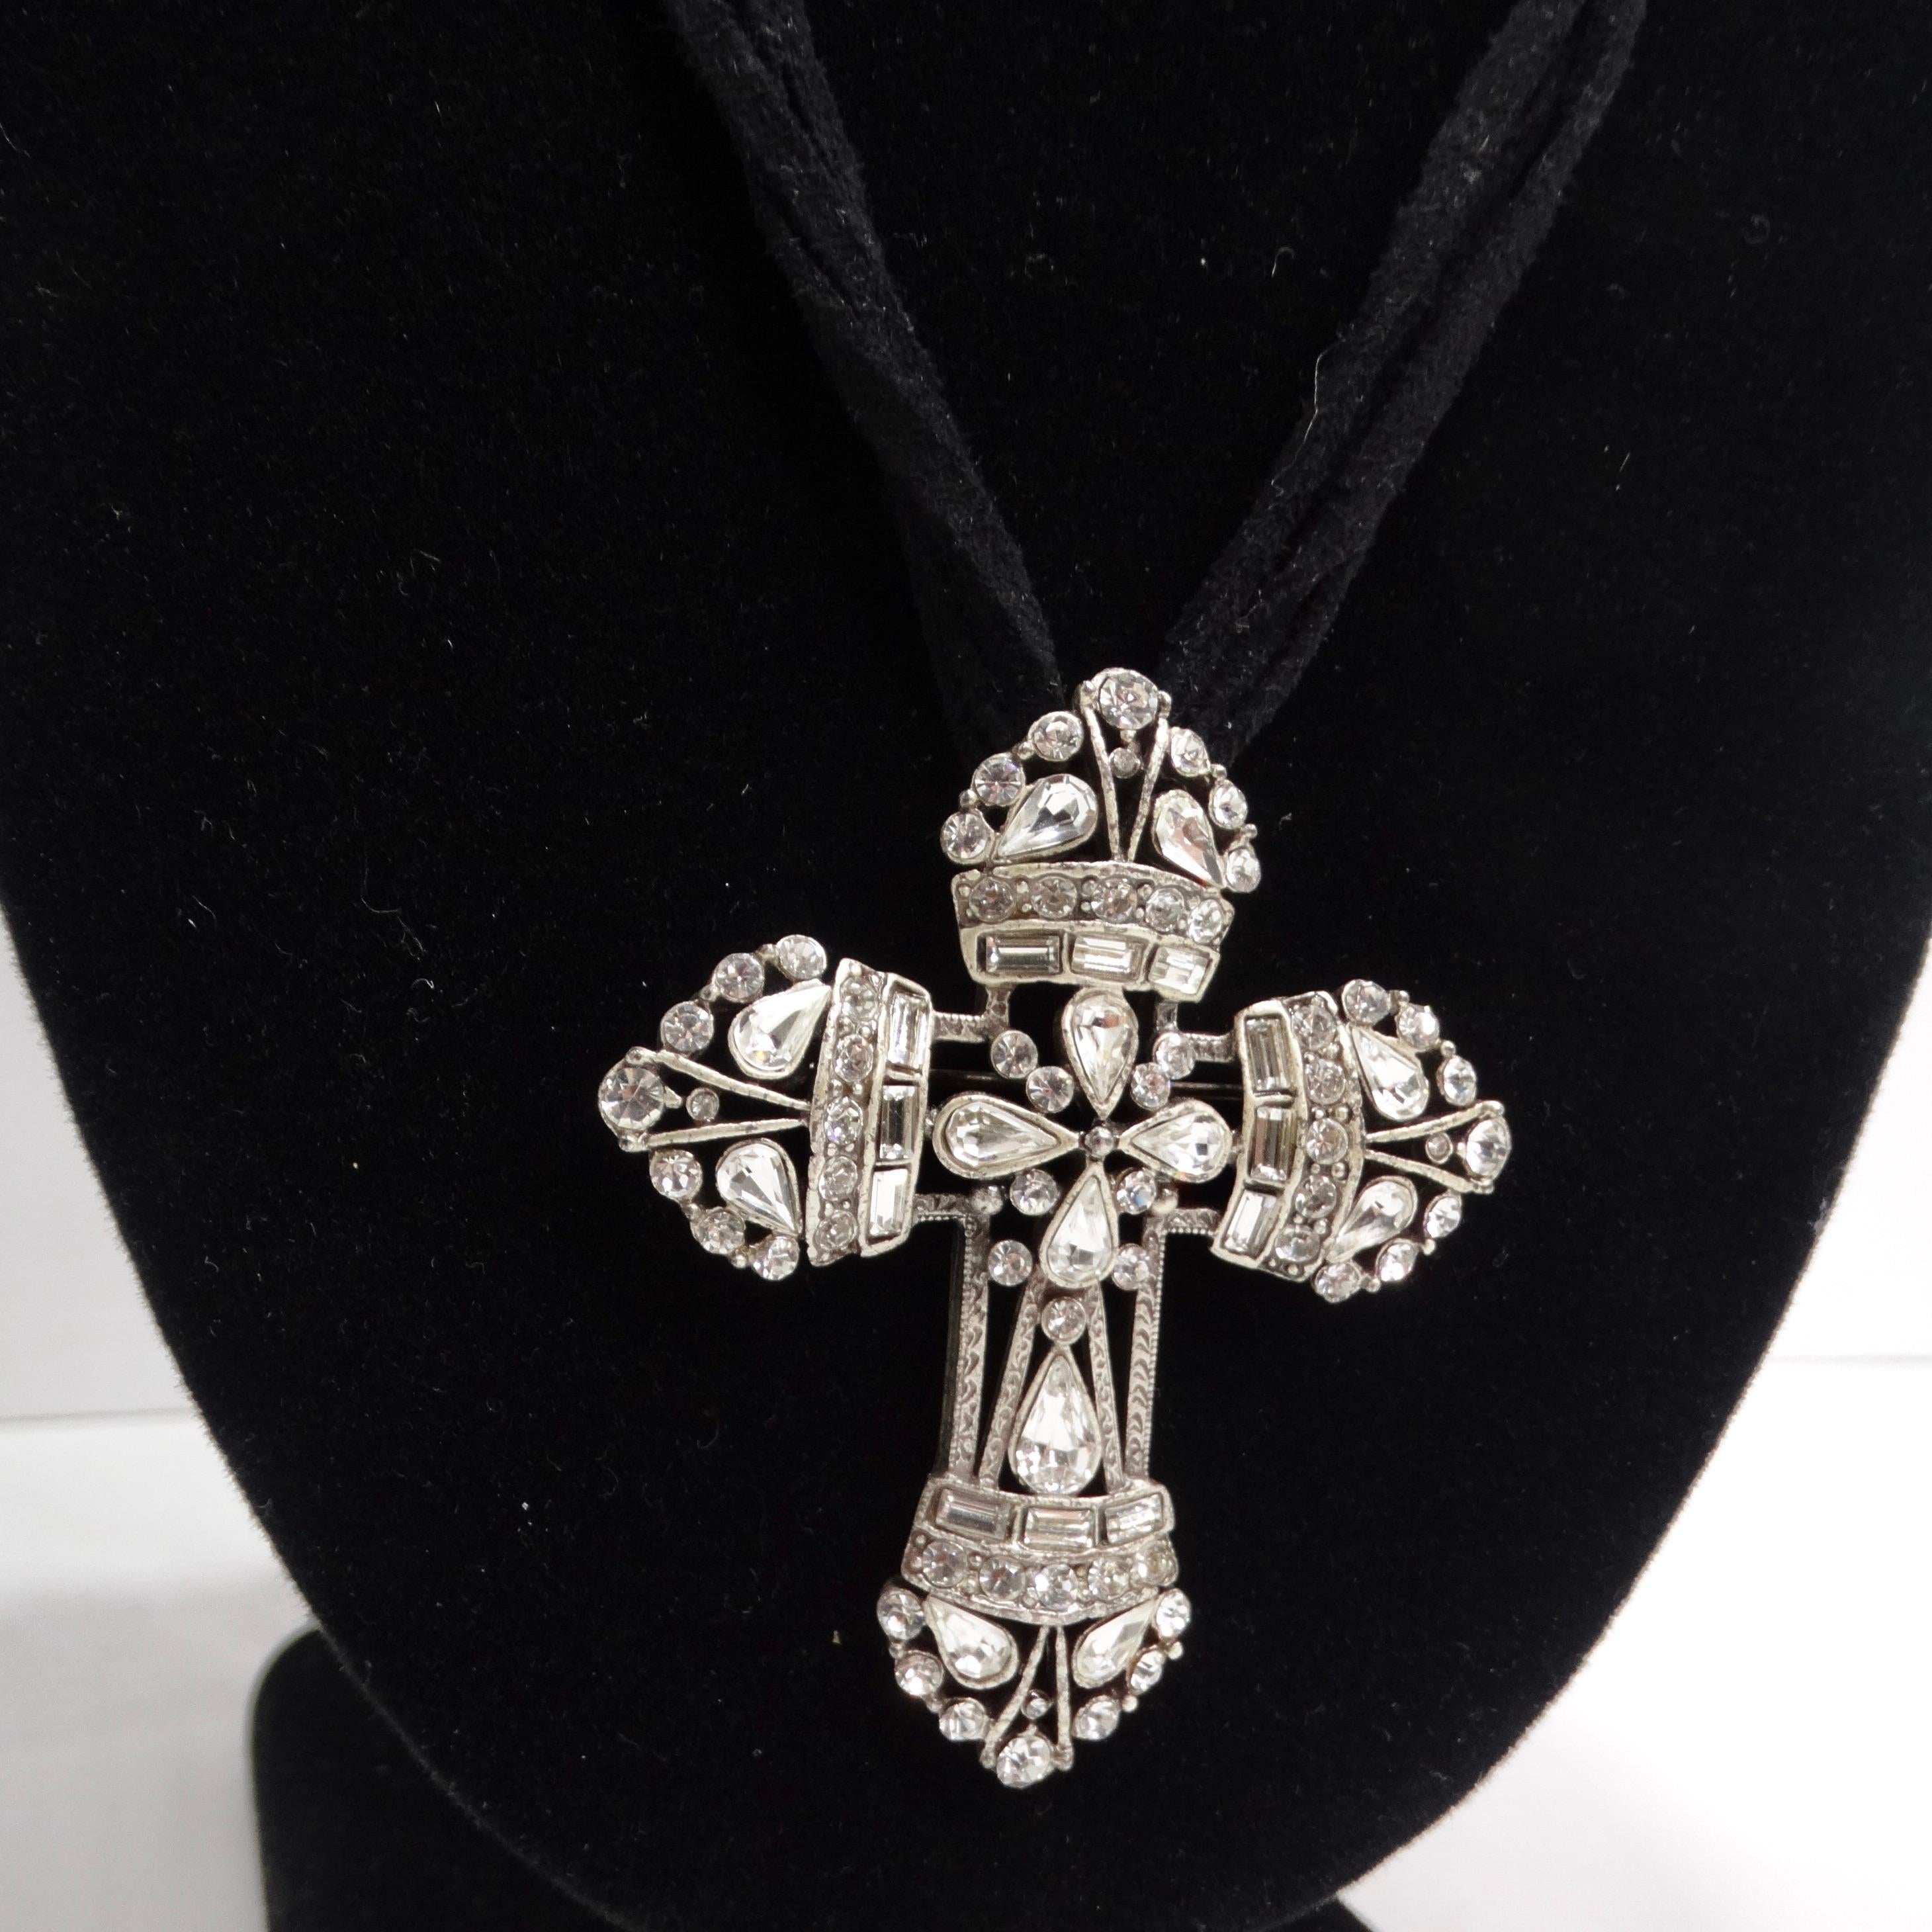 Introducing the 1990s Cross Pendant Adjustable Cord Necklace – a versatile and unique piece that seamlessly blends vintage charm with contemporary style. This necklace carries the timeless elegance of the 1990s, bringing a touch of nostalgia and